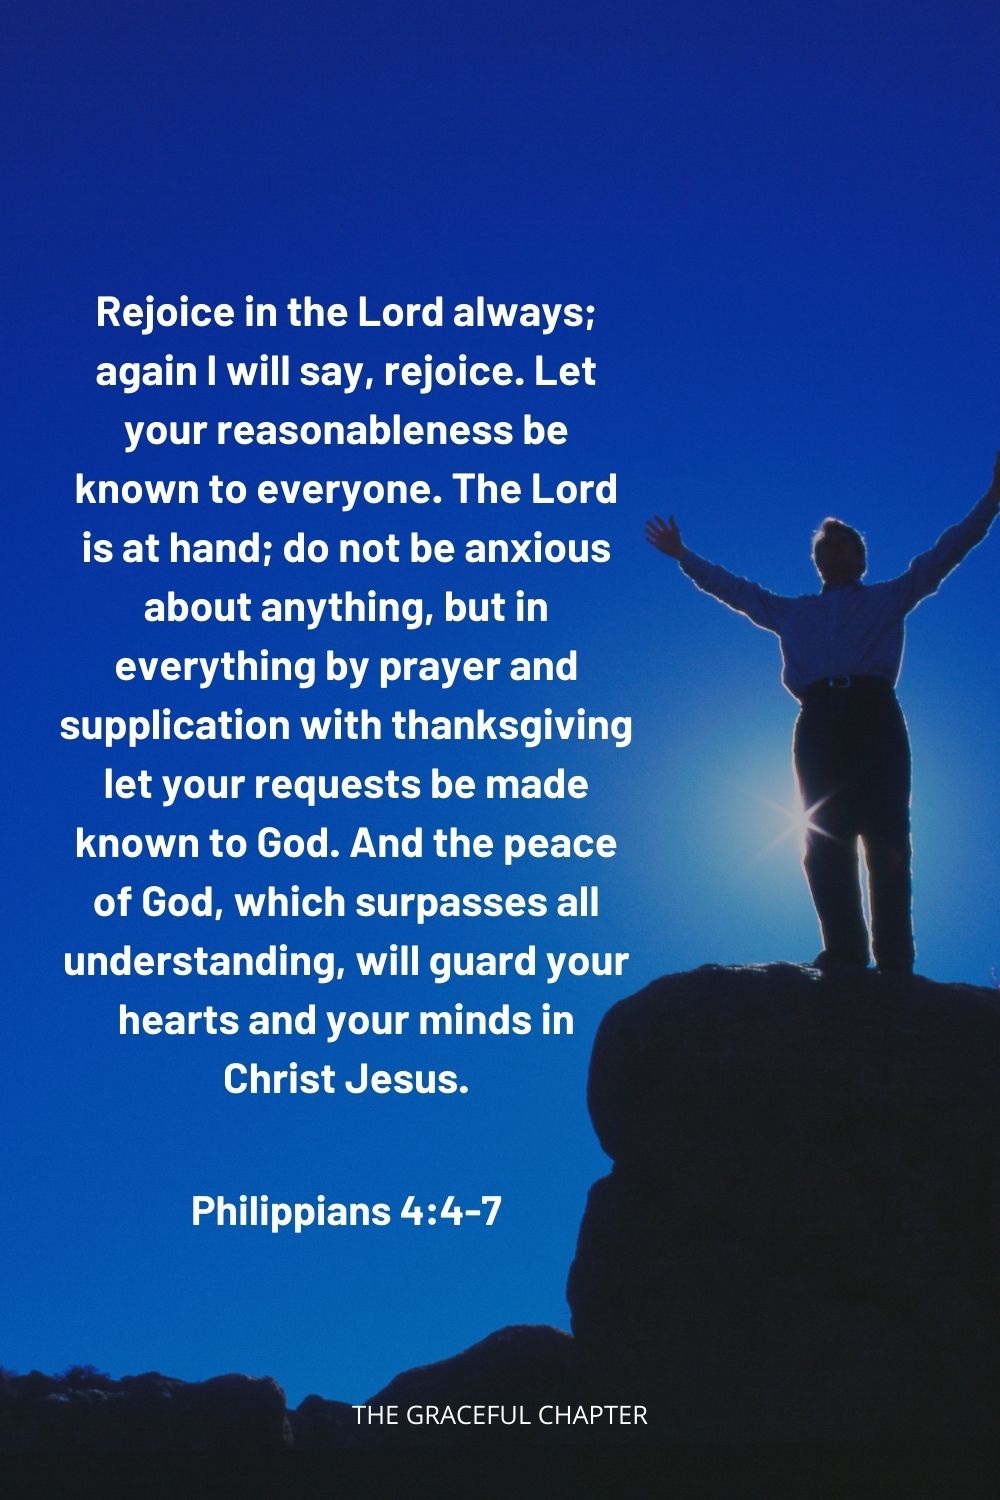 Rejoice in the Lord always; again I will say, rejoice. Let your reasonableness be known to everyone. The Lord is at hand; do not be anxious about anything, but in everything by prayer and supplication with thanksgiving let your requests be made known to God. And the peace of God, which surpasses all understanding, will guard your hearts and your minds in Christ Jesus. Philippians 4:4-7